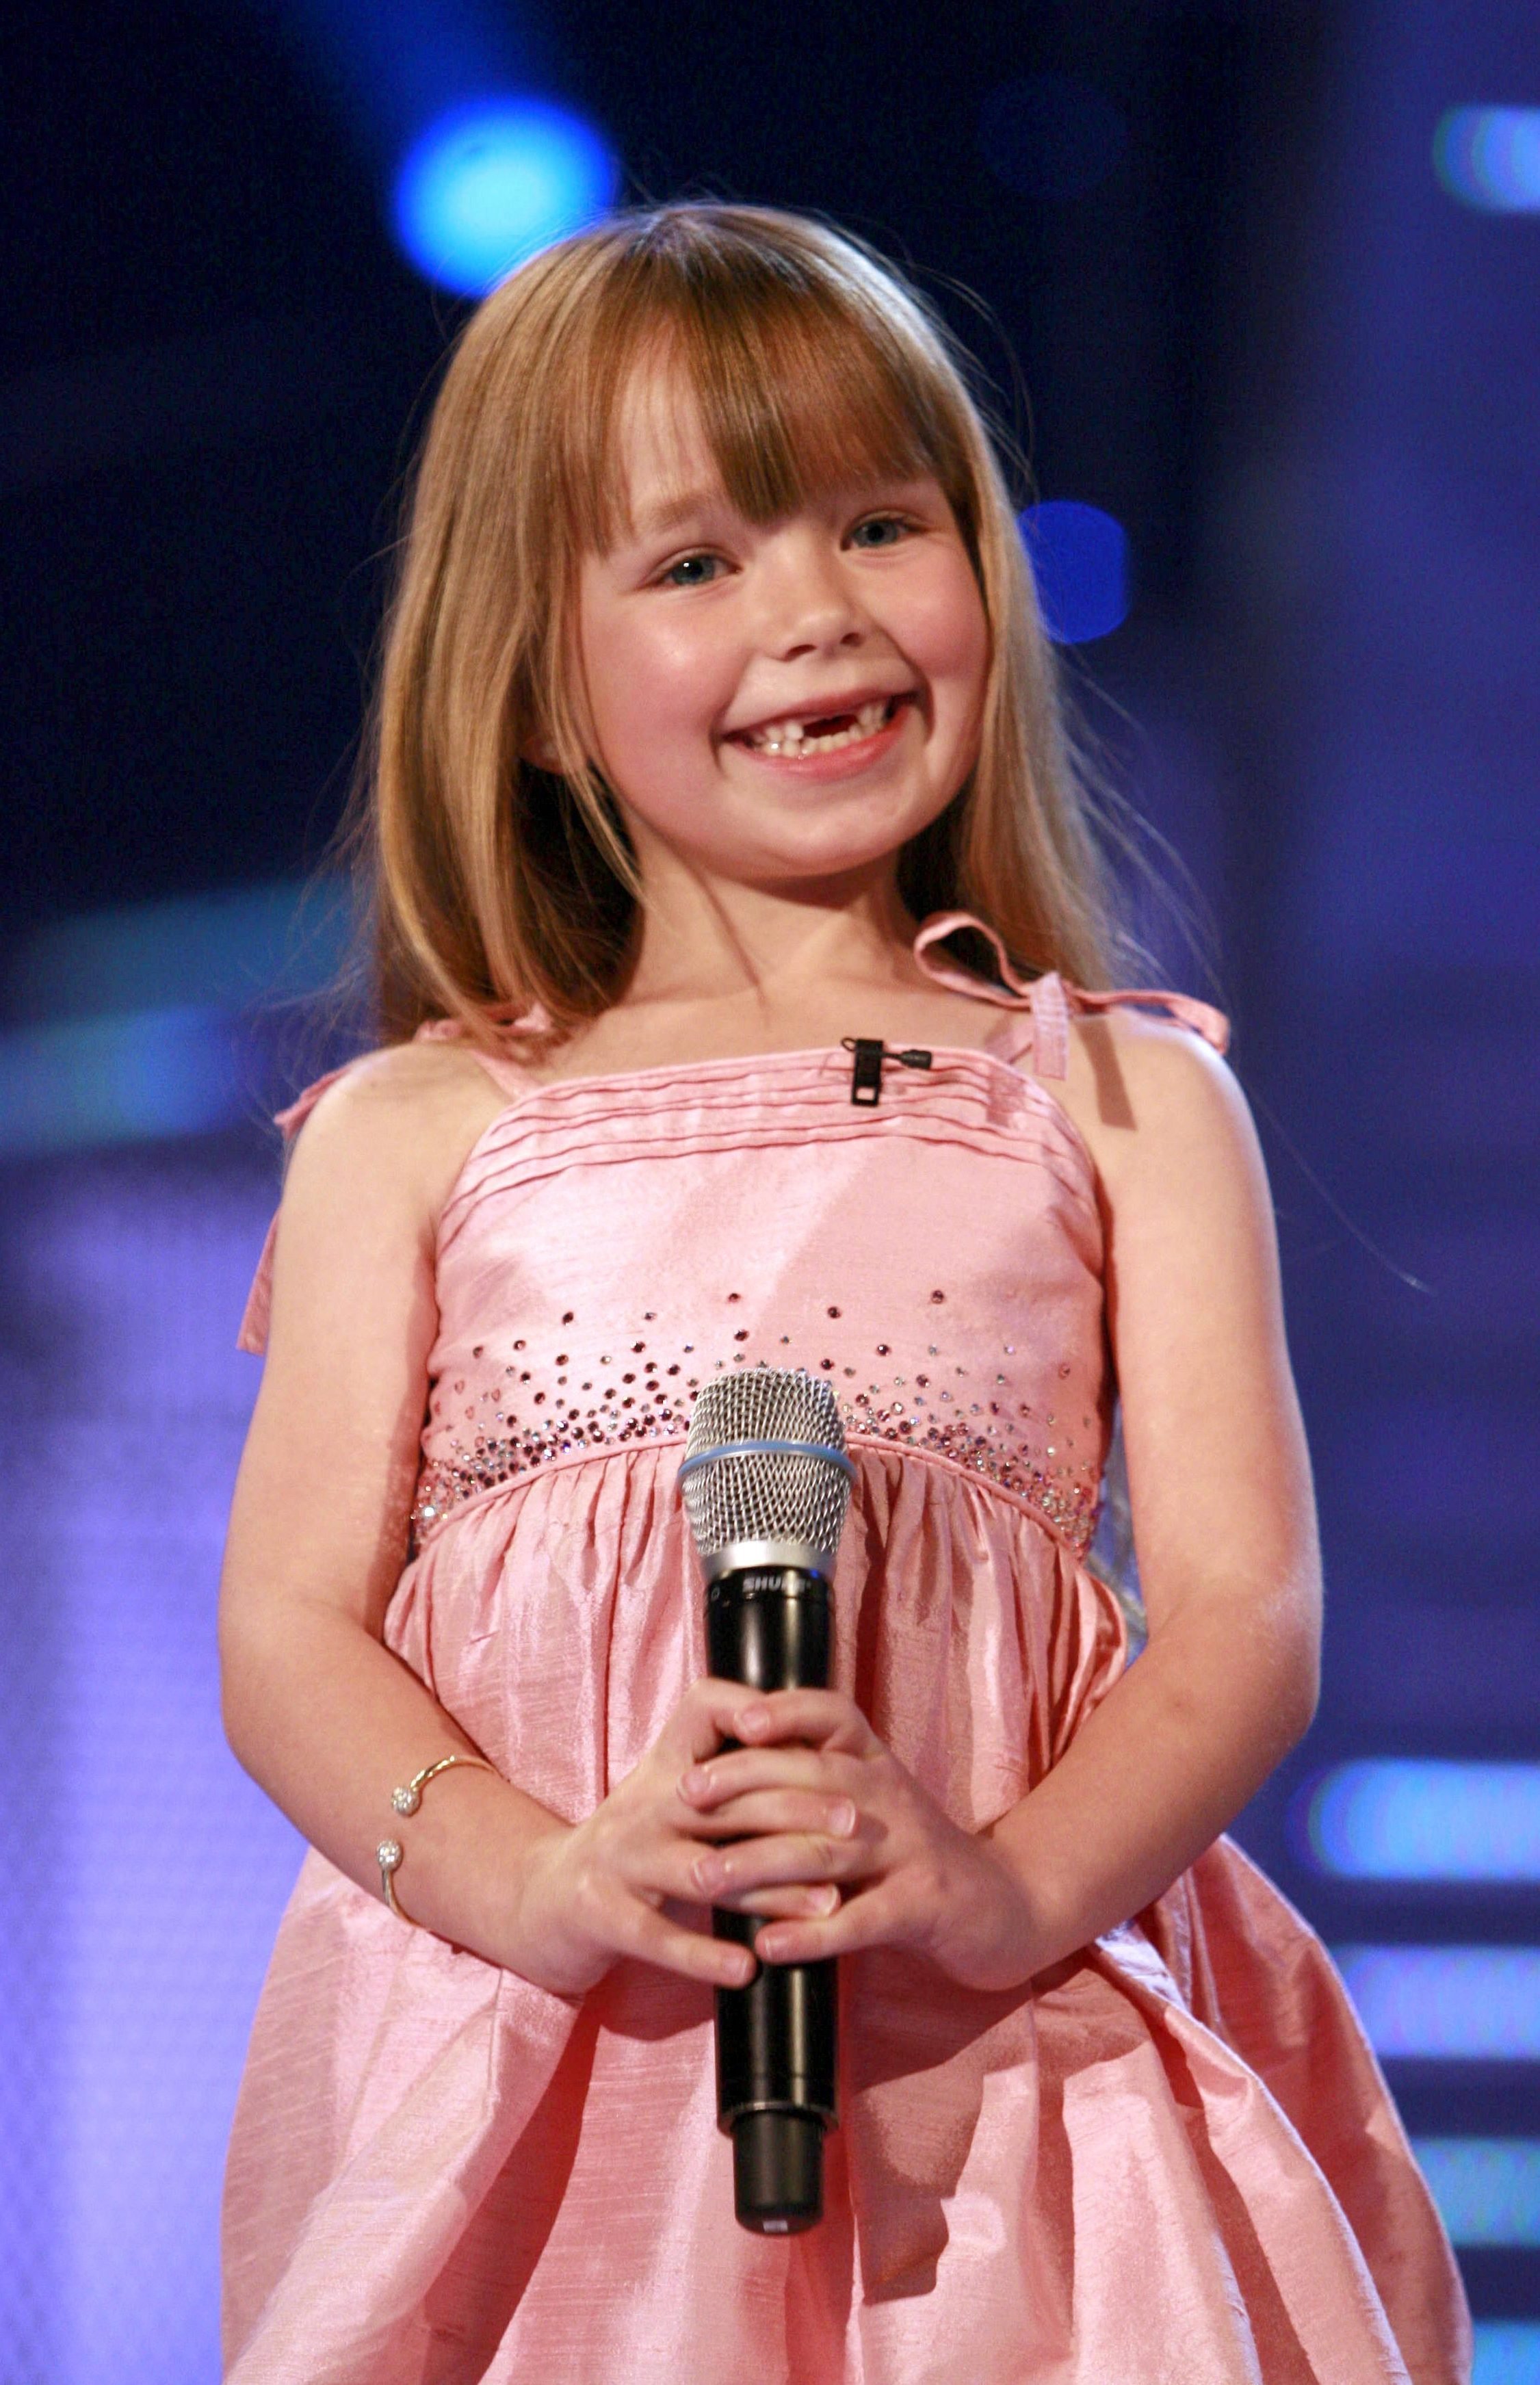  Connie wowed Simon Cowell en route to the BGT final in 2007